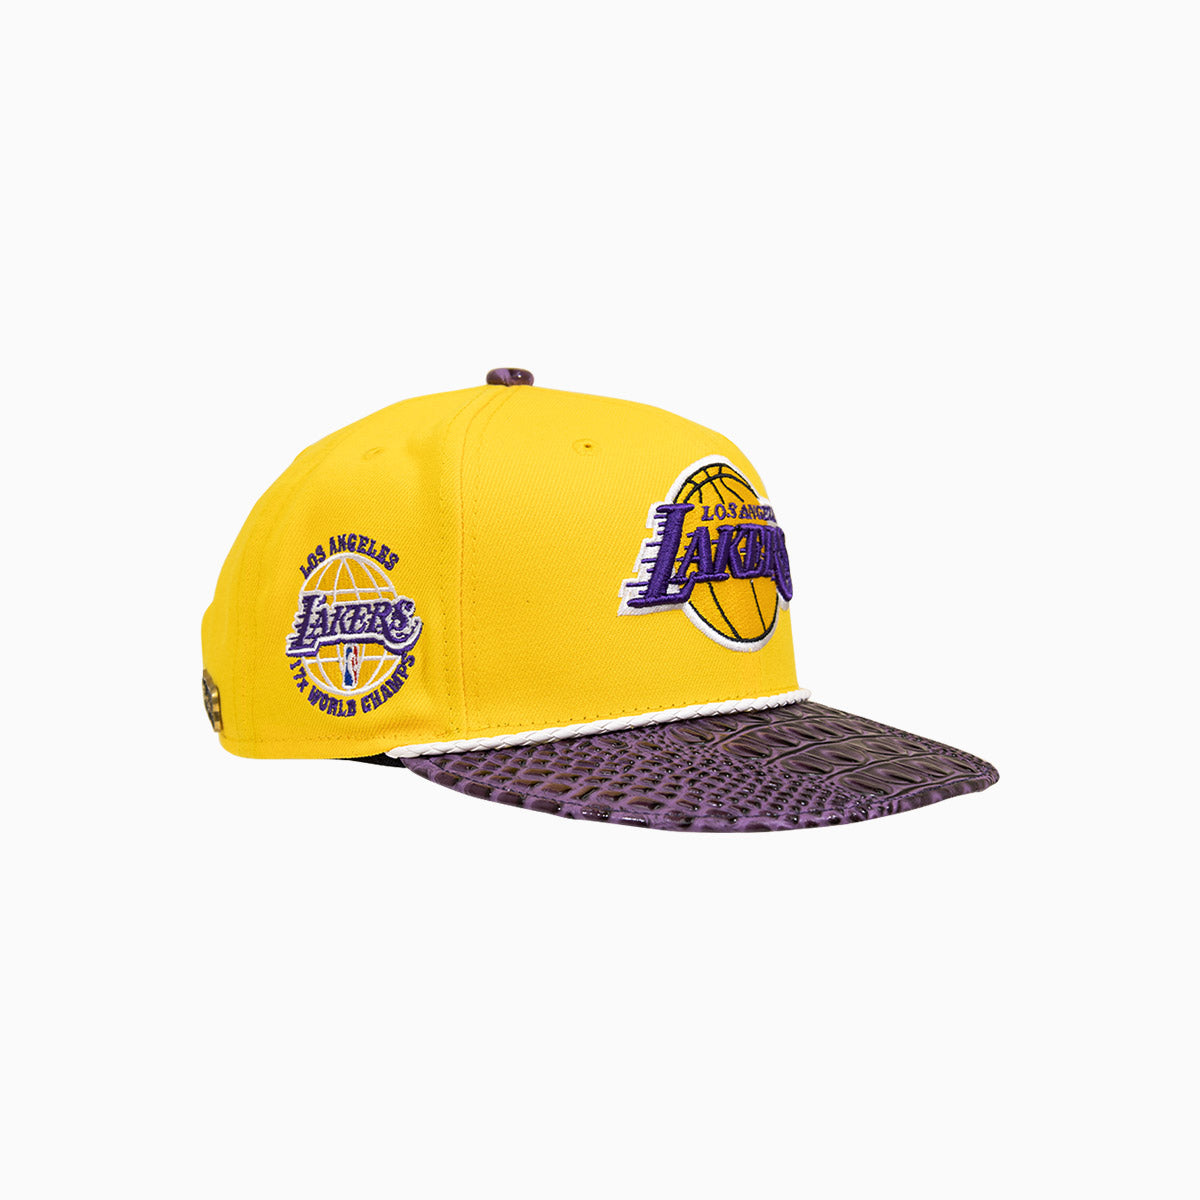 breyers-buck-50-los-angeles-lakers-hat-with-leather-visor-breyers-tlalh-yelw-pul